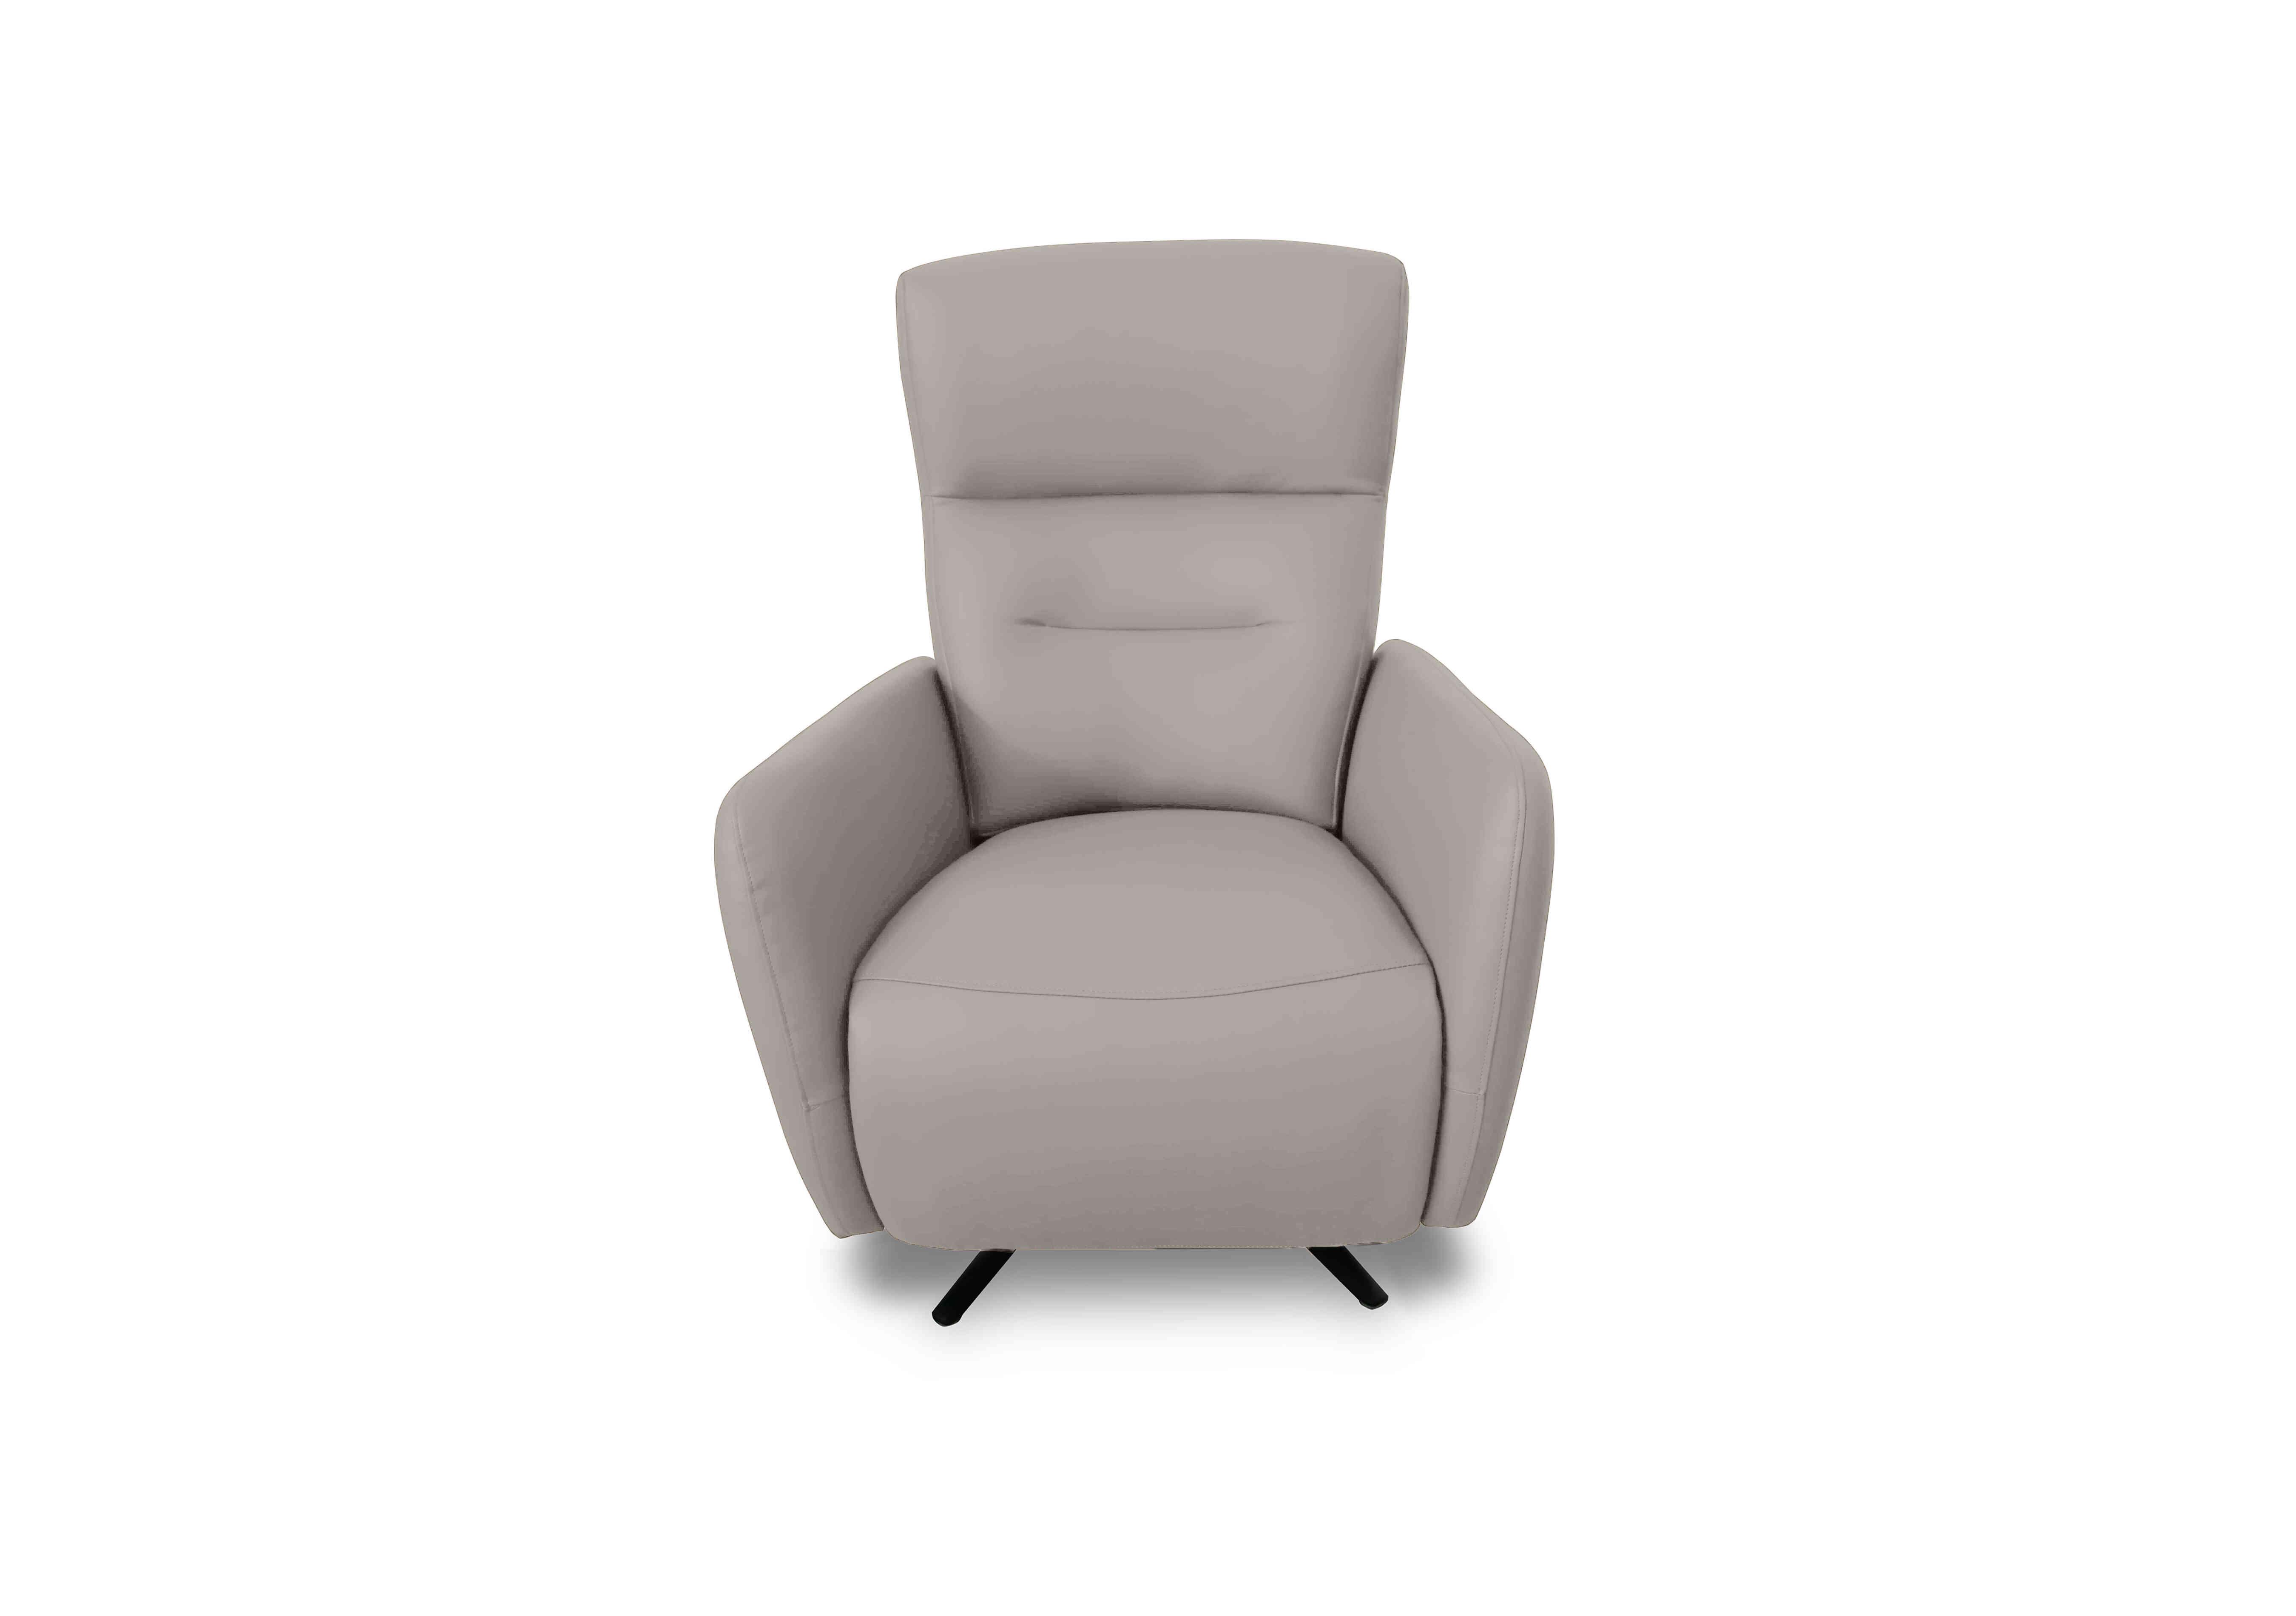 Designer Chair Collection Le Mans Leather Dual Power Recliner Swivel Chair in Nc-946b Feather Grey on Furniture Village